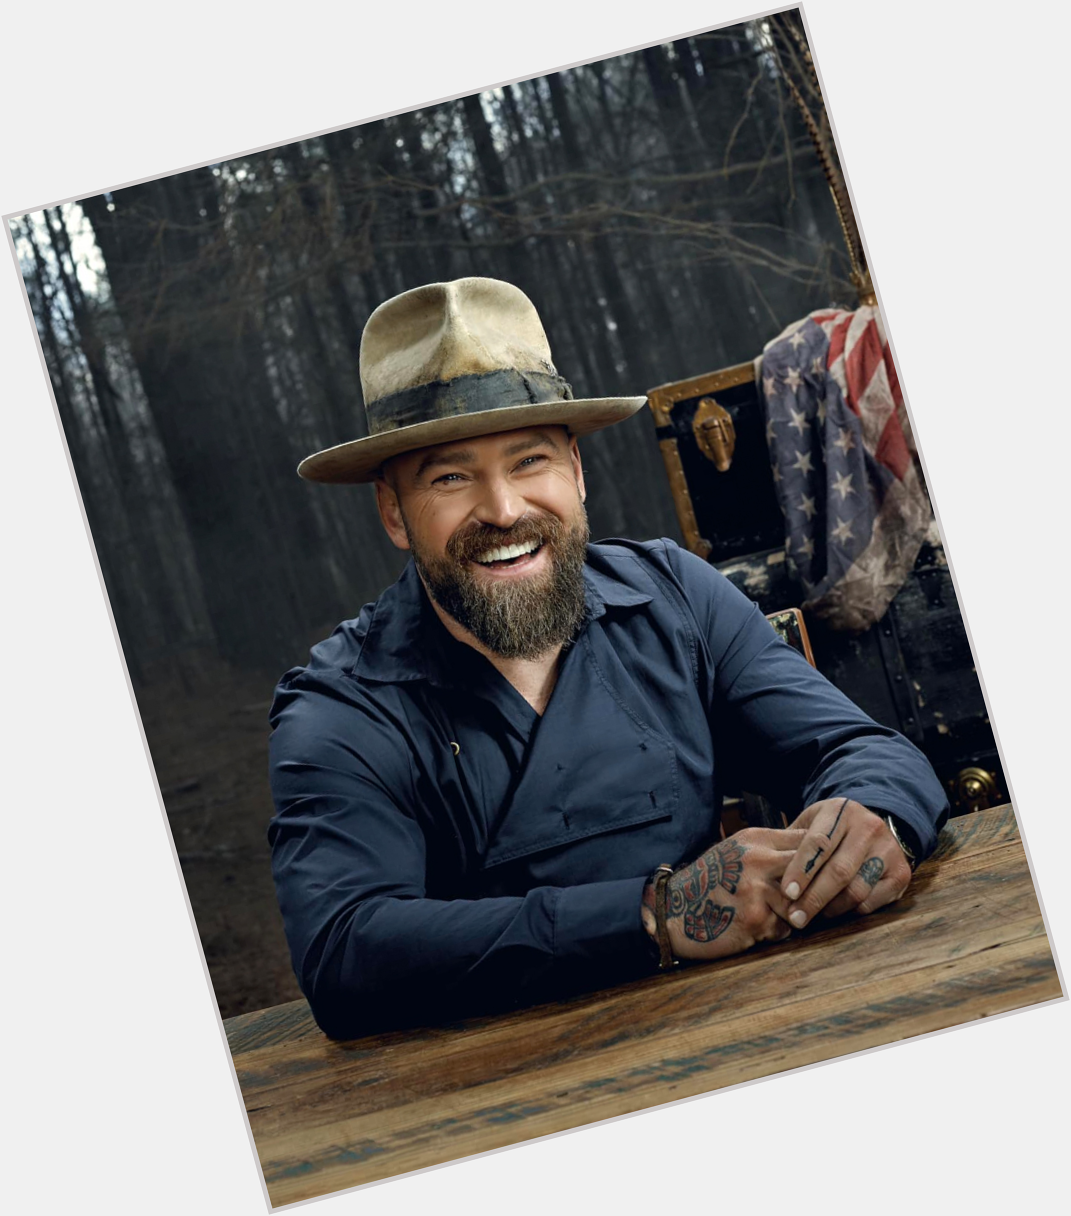 We\ll be having cold beer on a Friday night and wishing Zac Brown a Happy Birthday! 